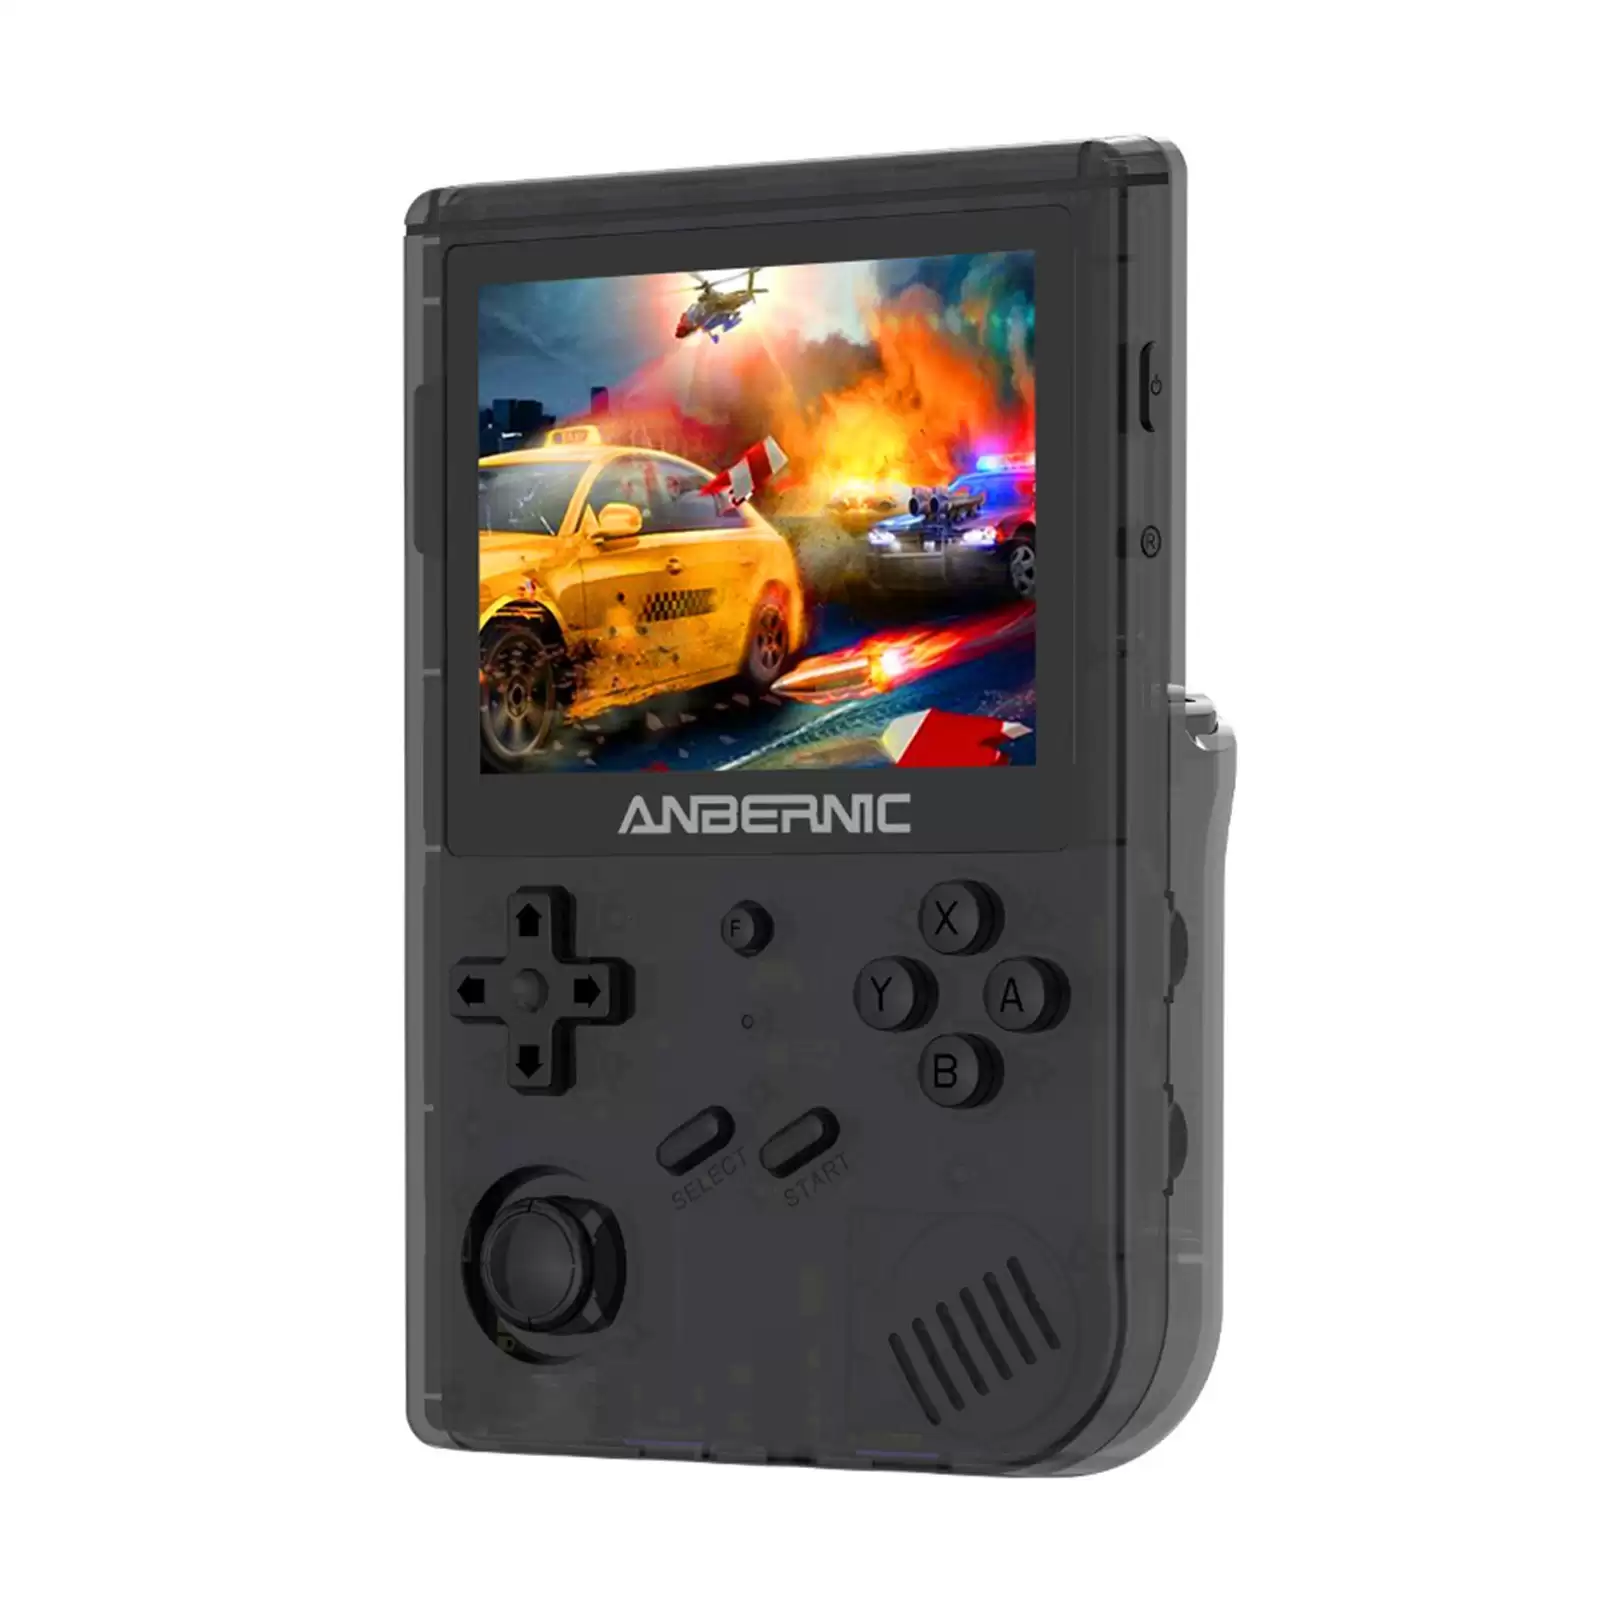 Order In Just $99.99 Rg351v 3.5 In 640*480 Handheld Game Console, Free Shipping At Tomtop